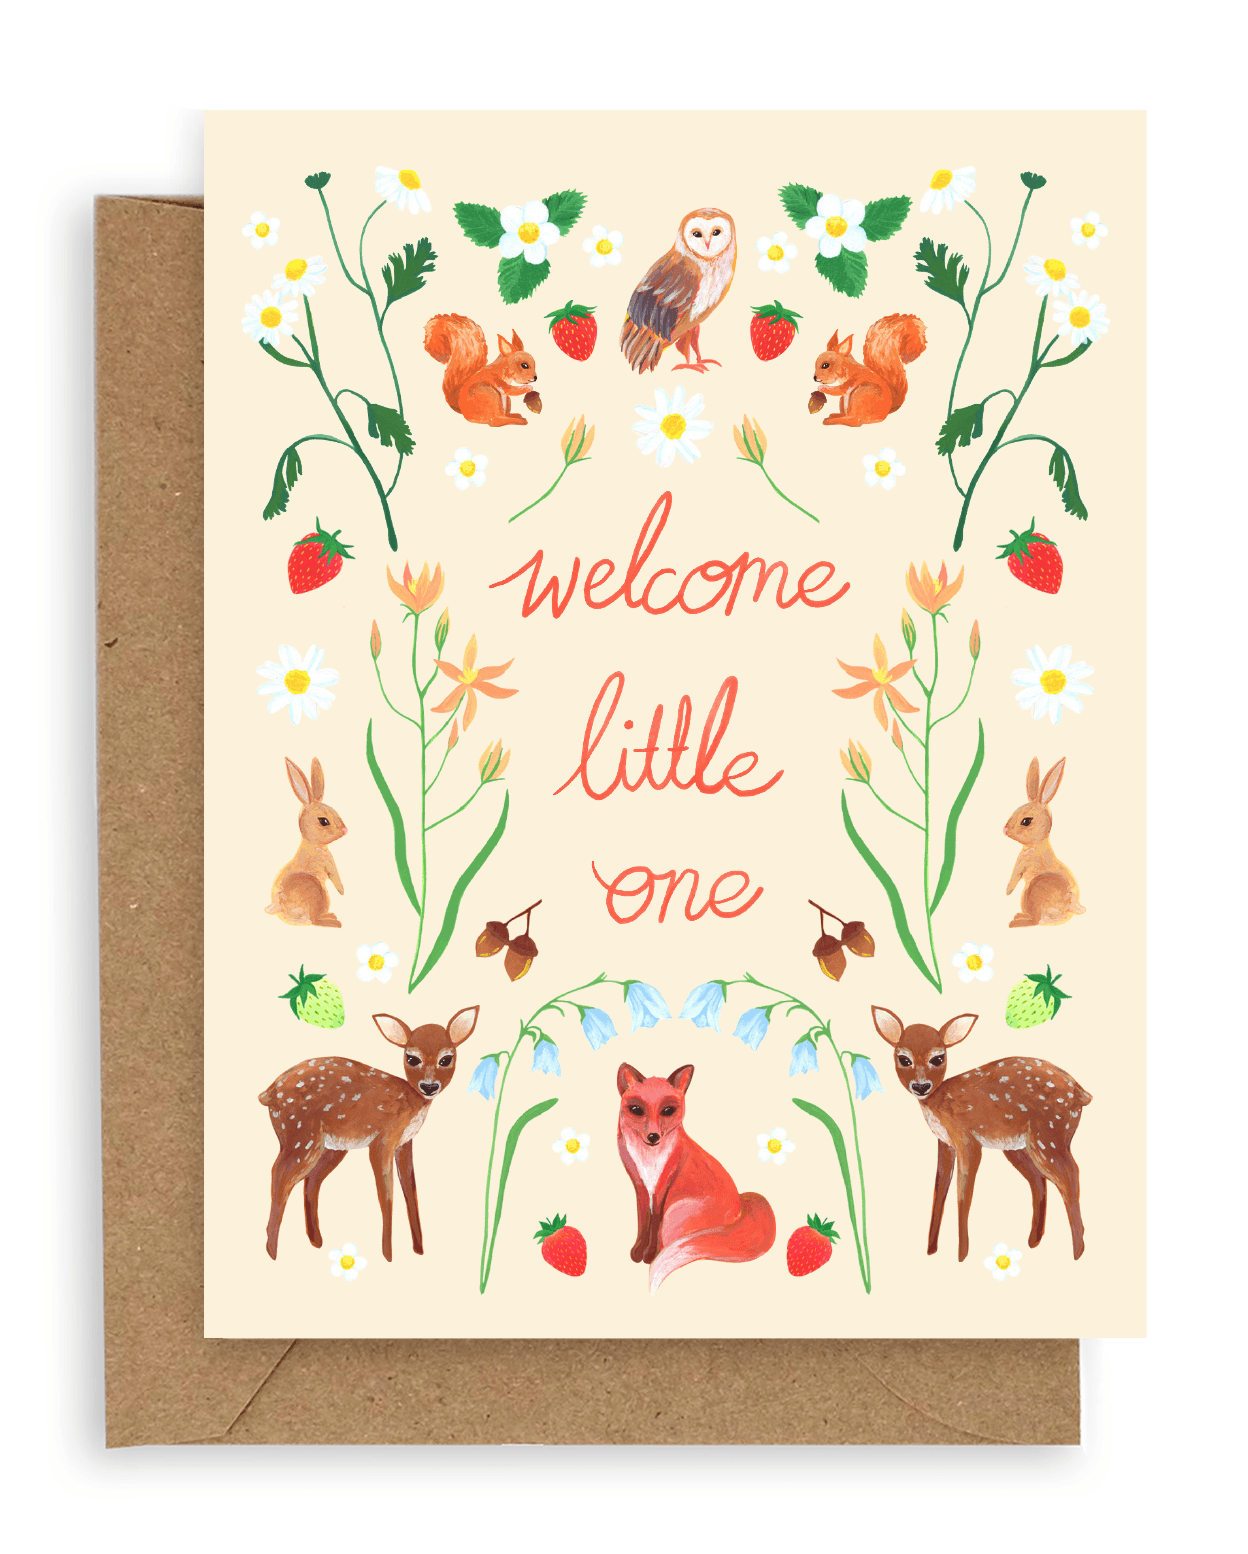 Our exciting new Holiday gift wrap features a stunning array of forest animals and flora. There are Owls, Deer, Rabbits, Squirrels, Foxes, Mushrooms, berries and various kinds of flora with orange, white, red, blue, and yellow blooms above the words &quot;welcome little one&quot; in red font printed on a cream background. Shown with kraft envelope.